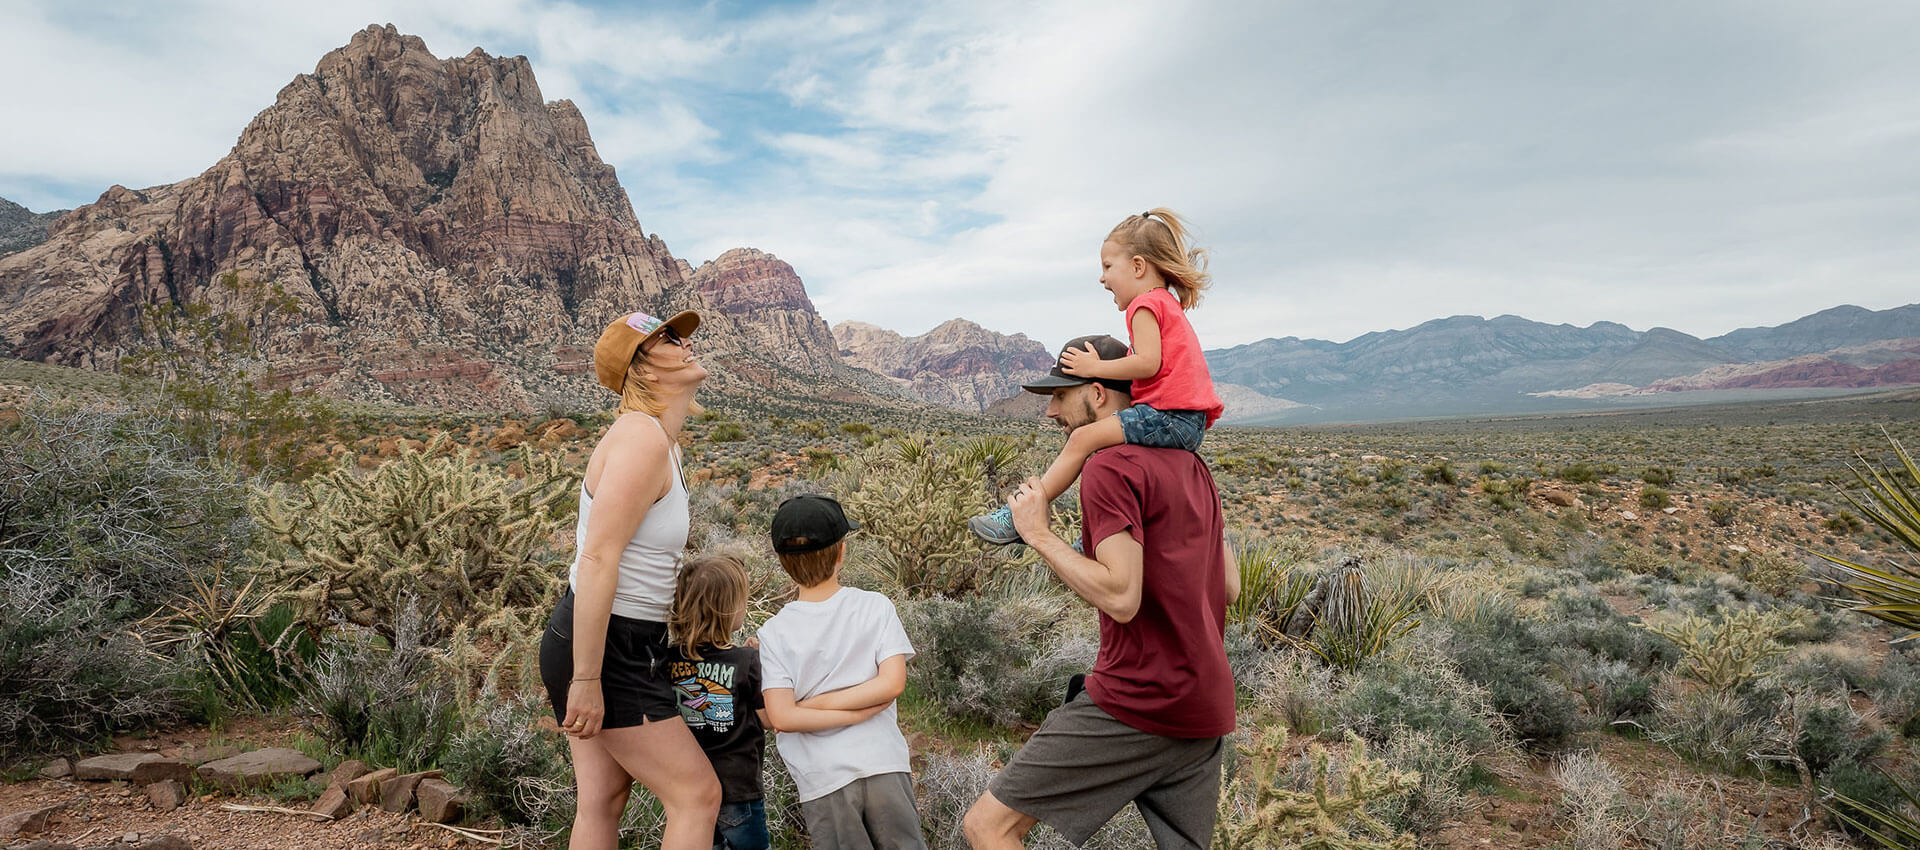 day trips from las vegas spring mountain ranch state park